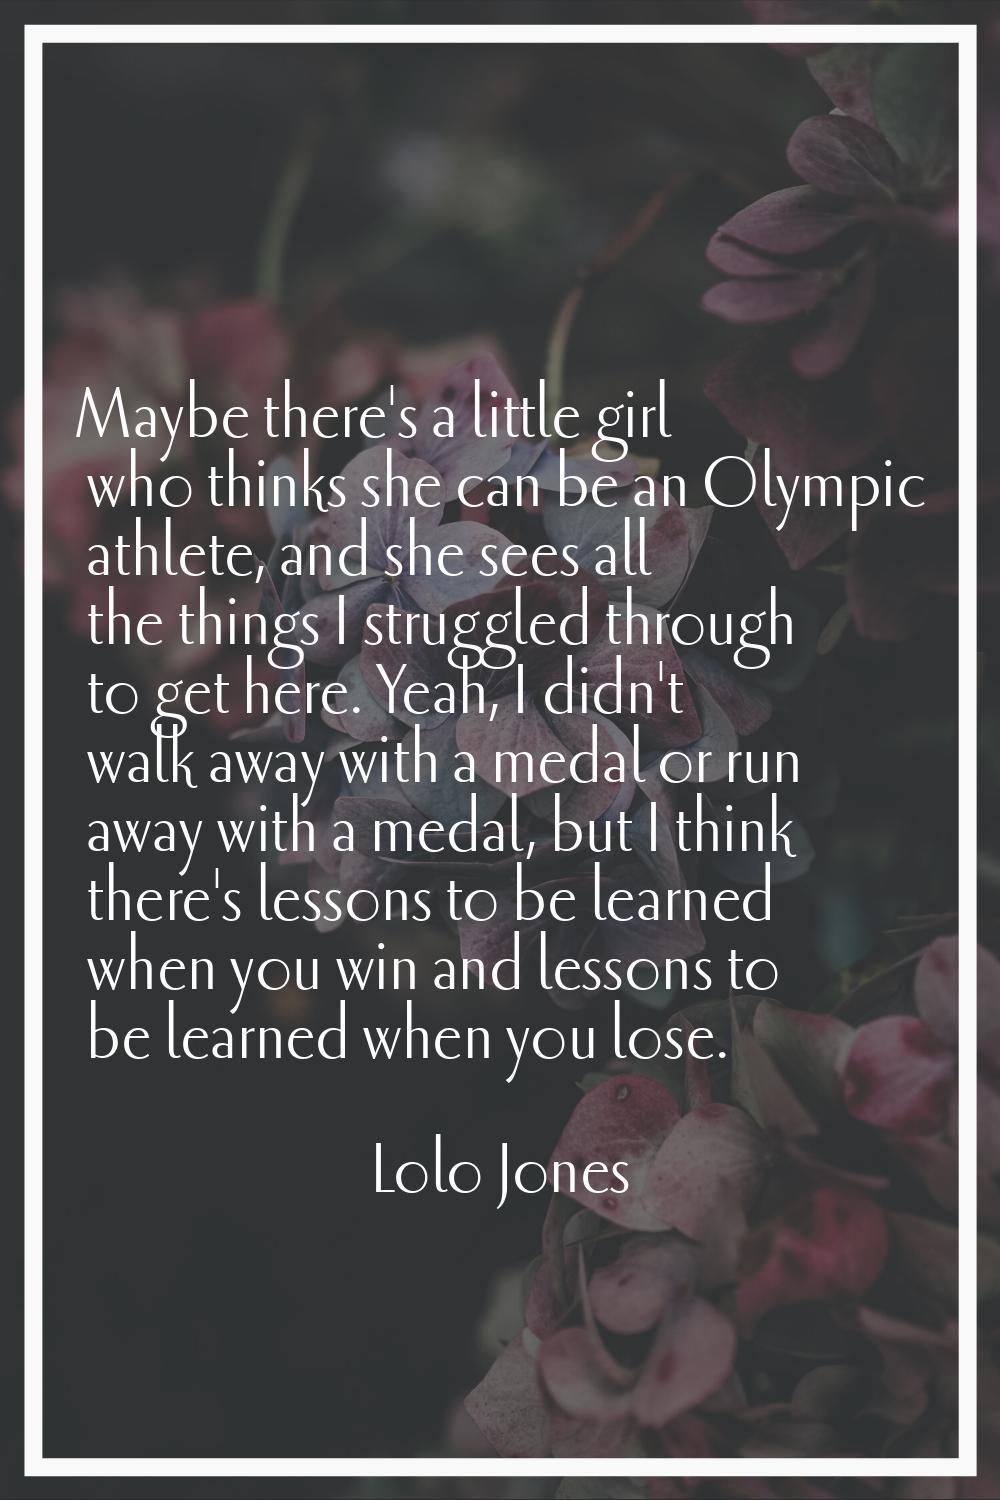 Maybe there's a little girl who thinks she can be an Olympic athlete, and she sees all the things I